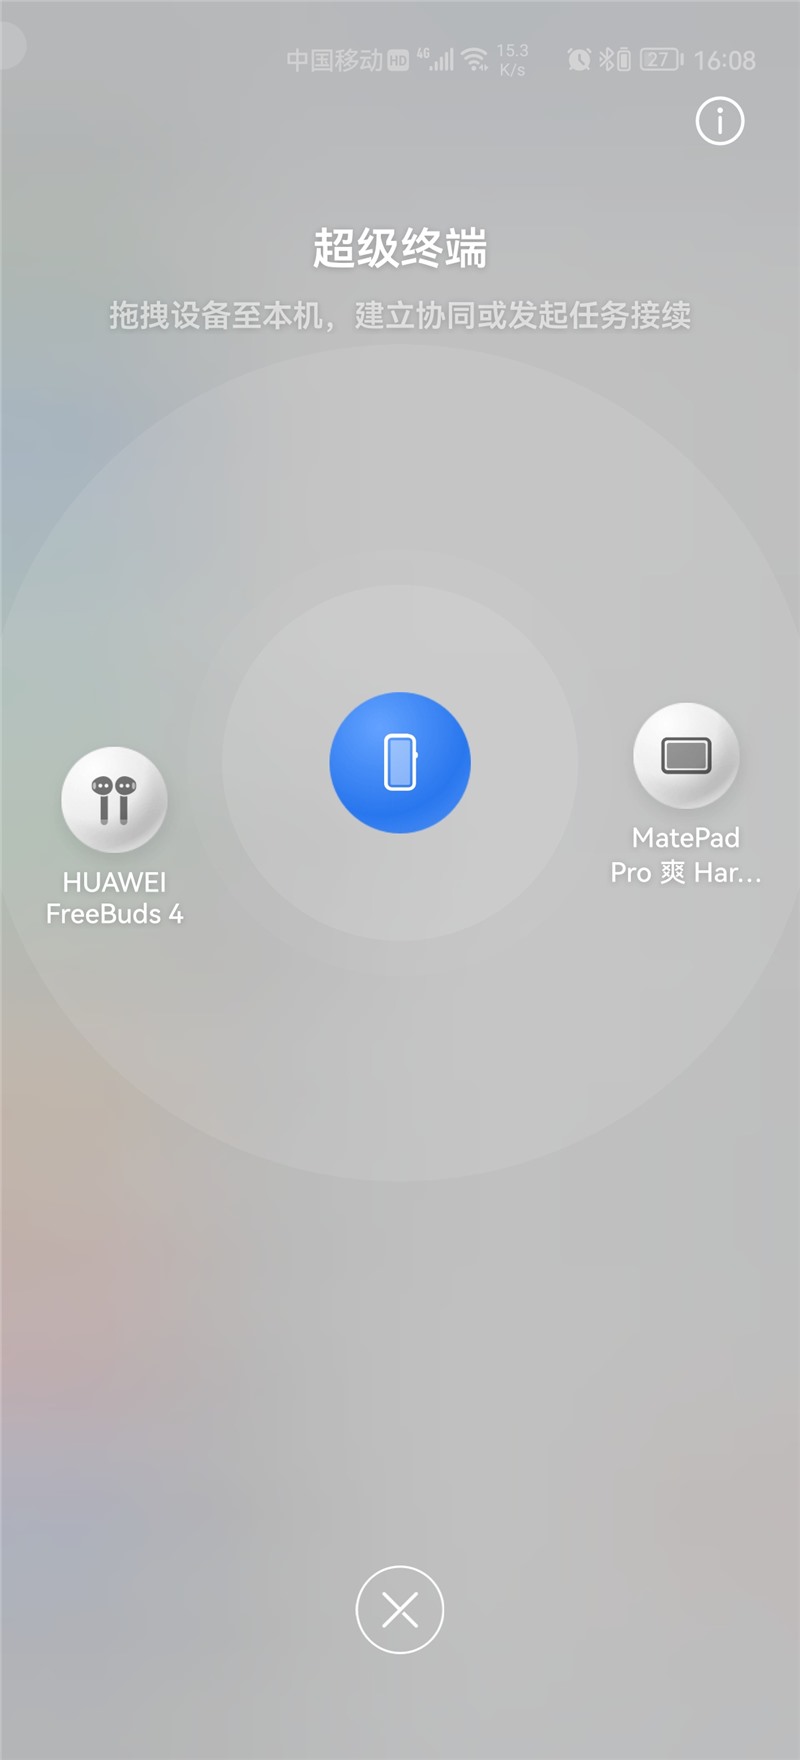 Huawei Mate 30 and P40 series HarmonyOS 2.0.0.138 Freebuds support